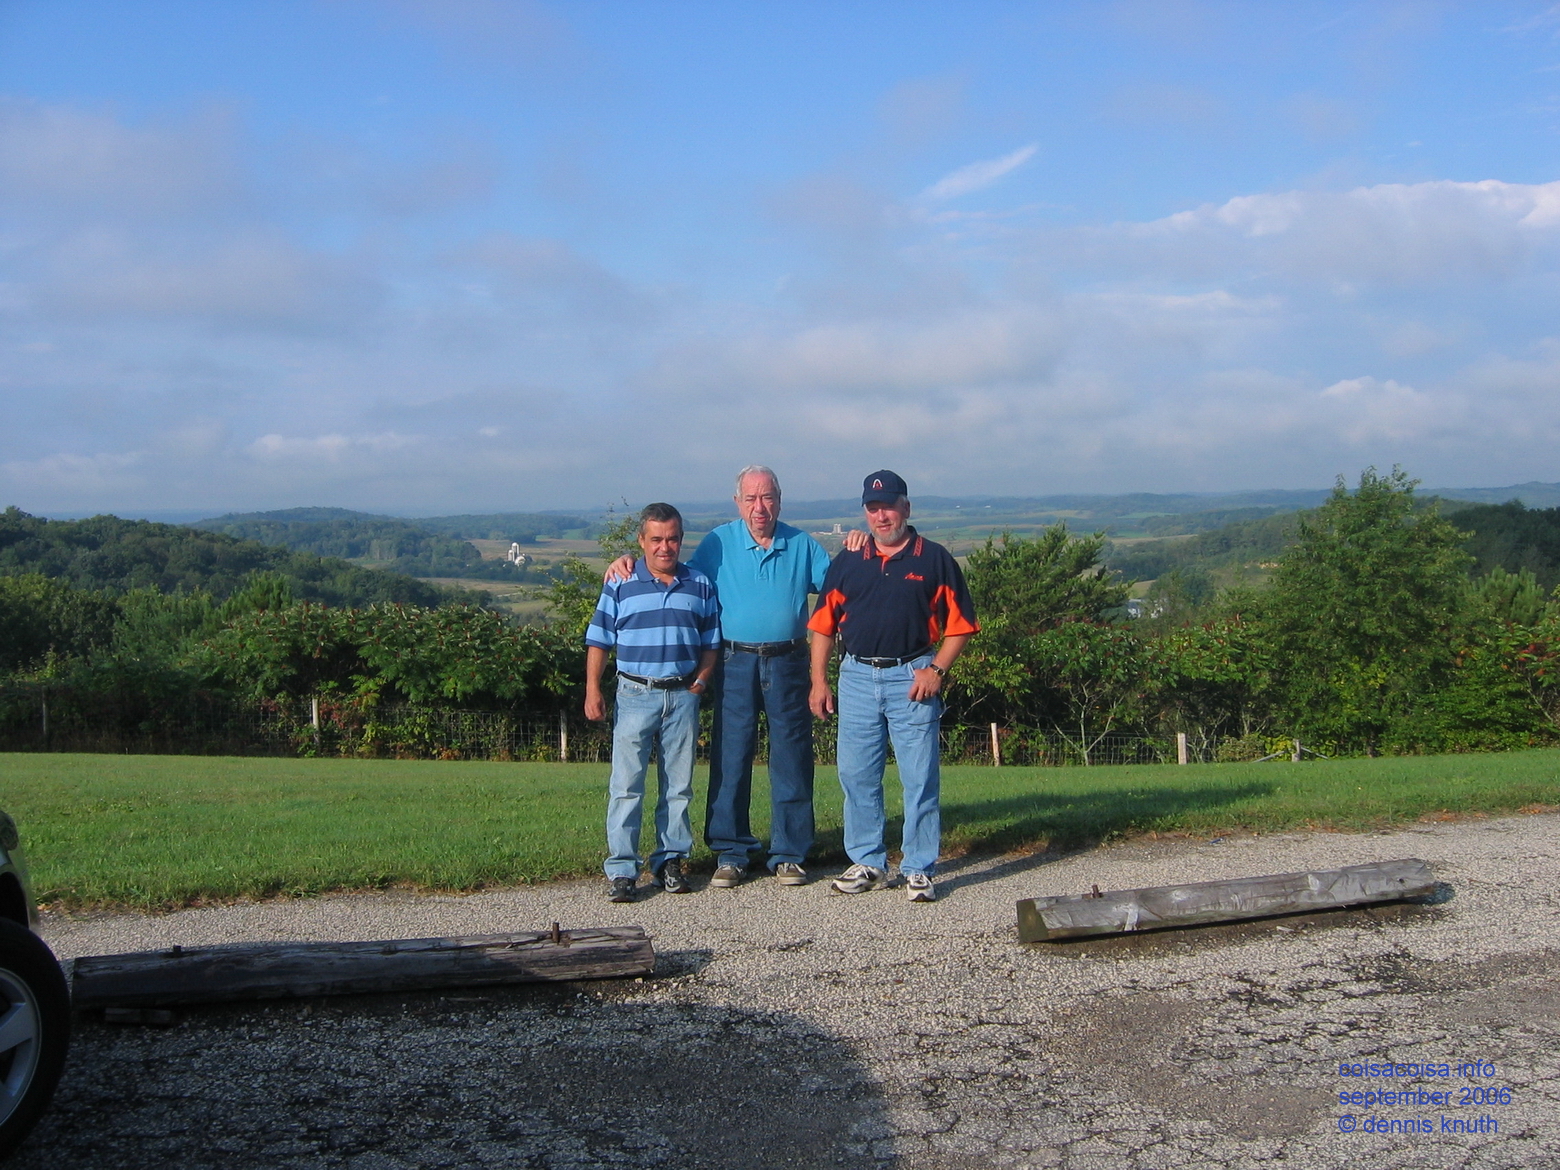 Gary Helton and Muscio at a Chippewa Valley Overlook near Osseo